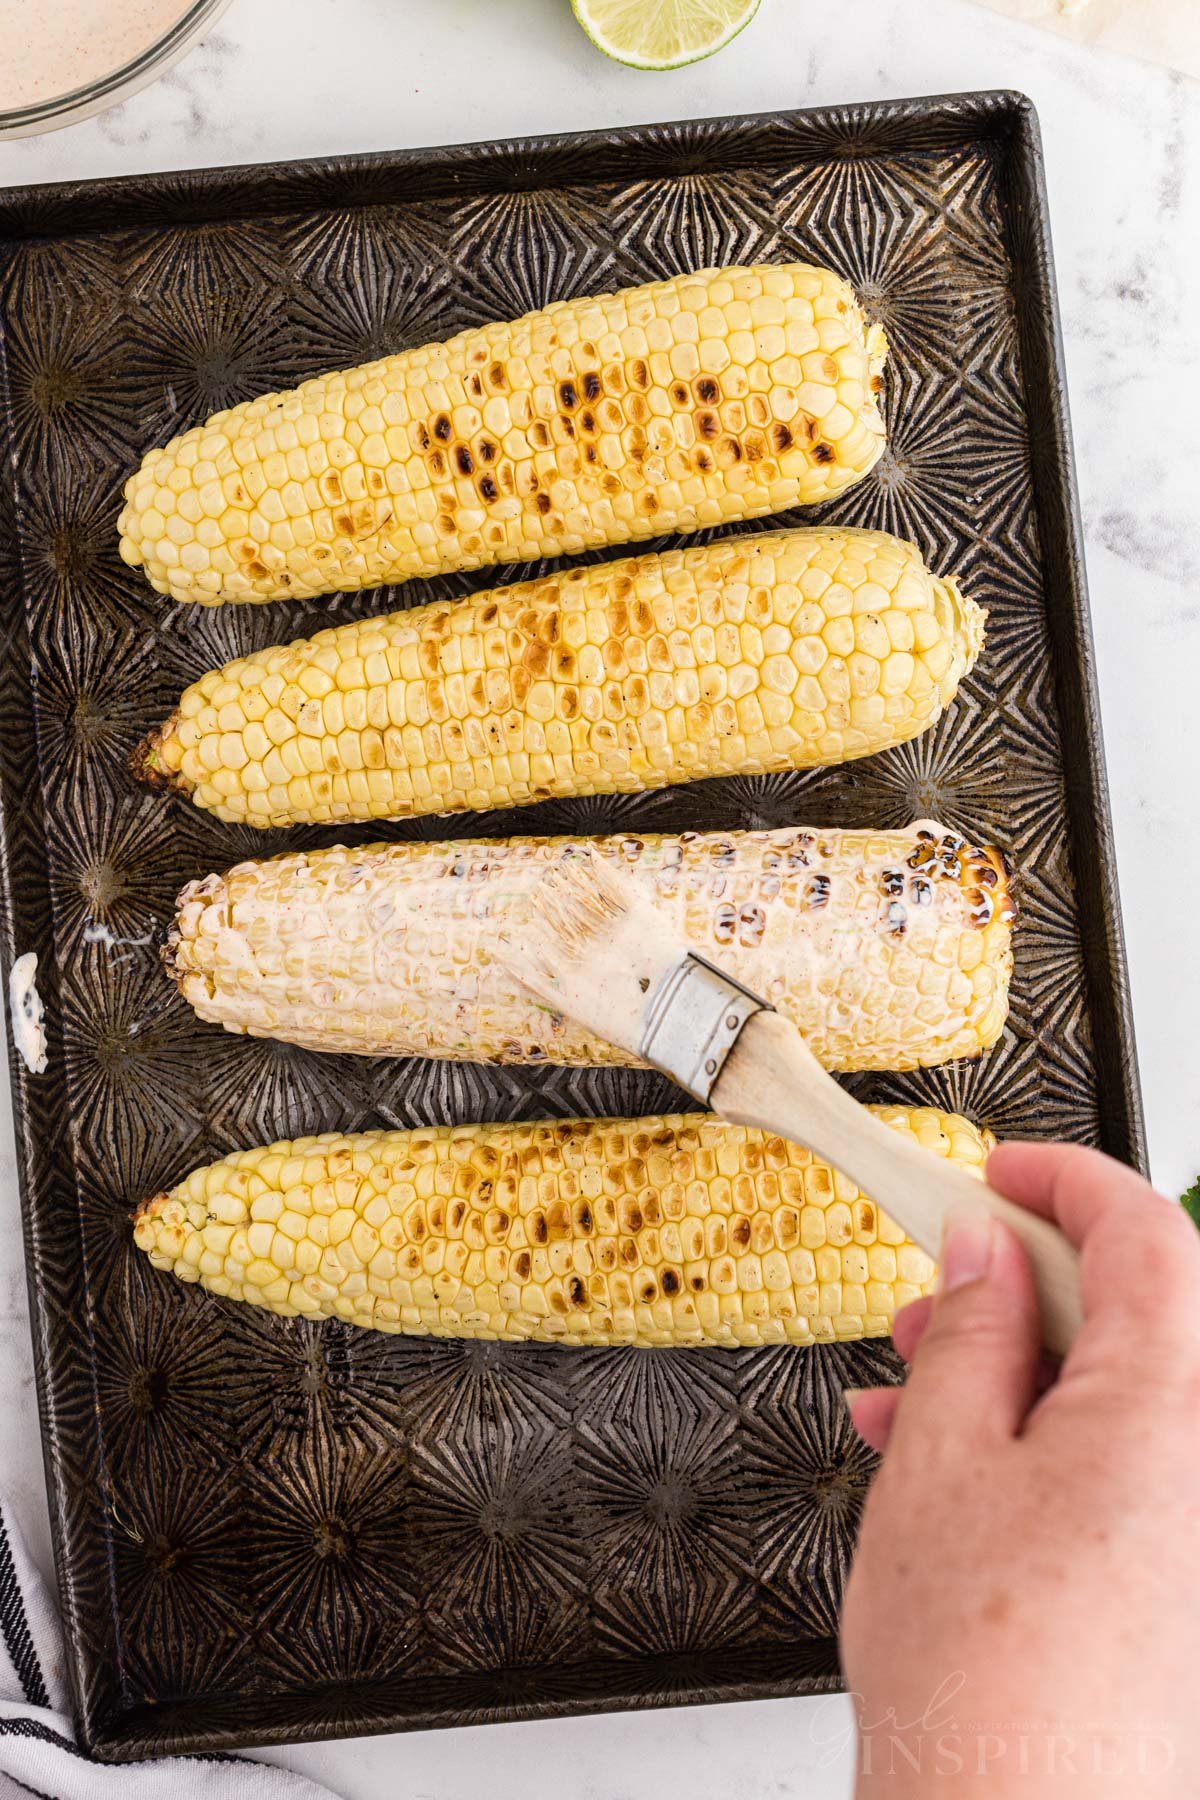 Pastry brush applying mayonnaise mixture to grilled Mexican street corn.